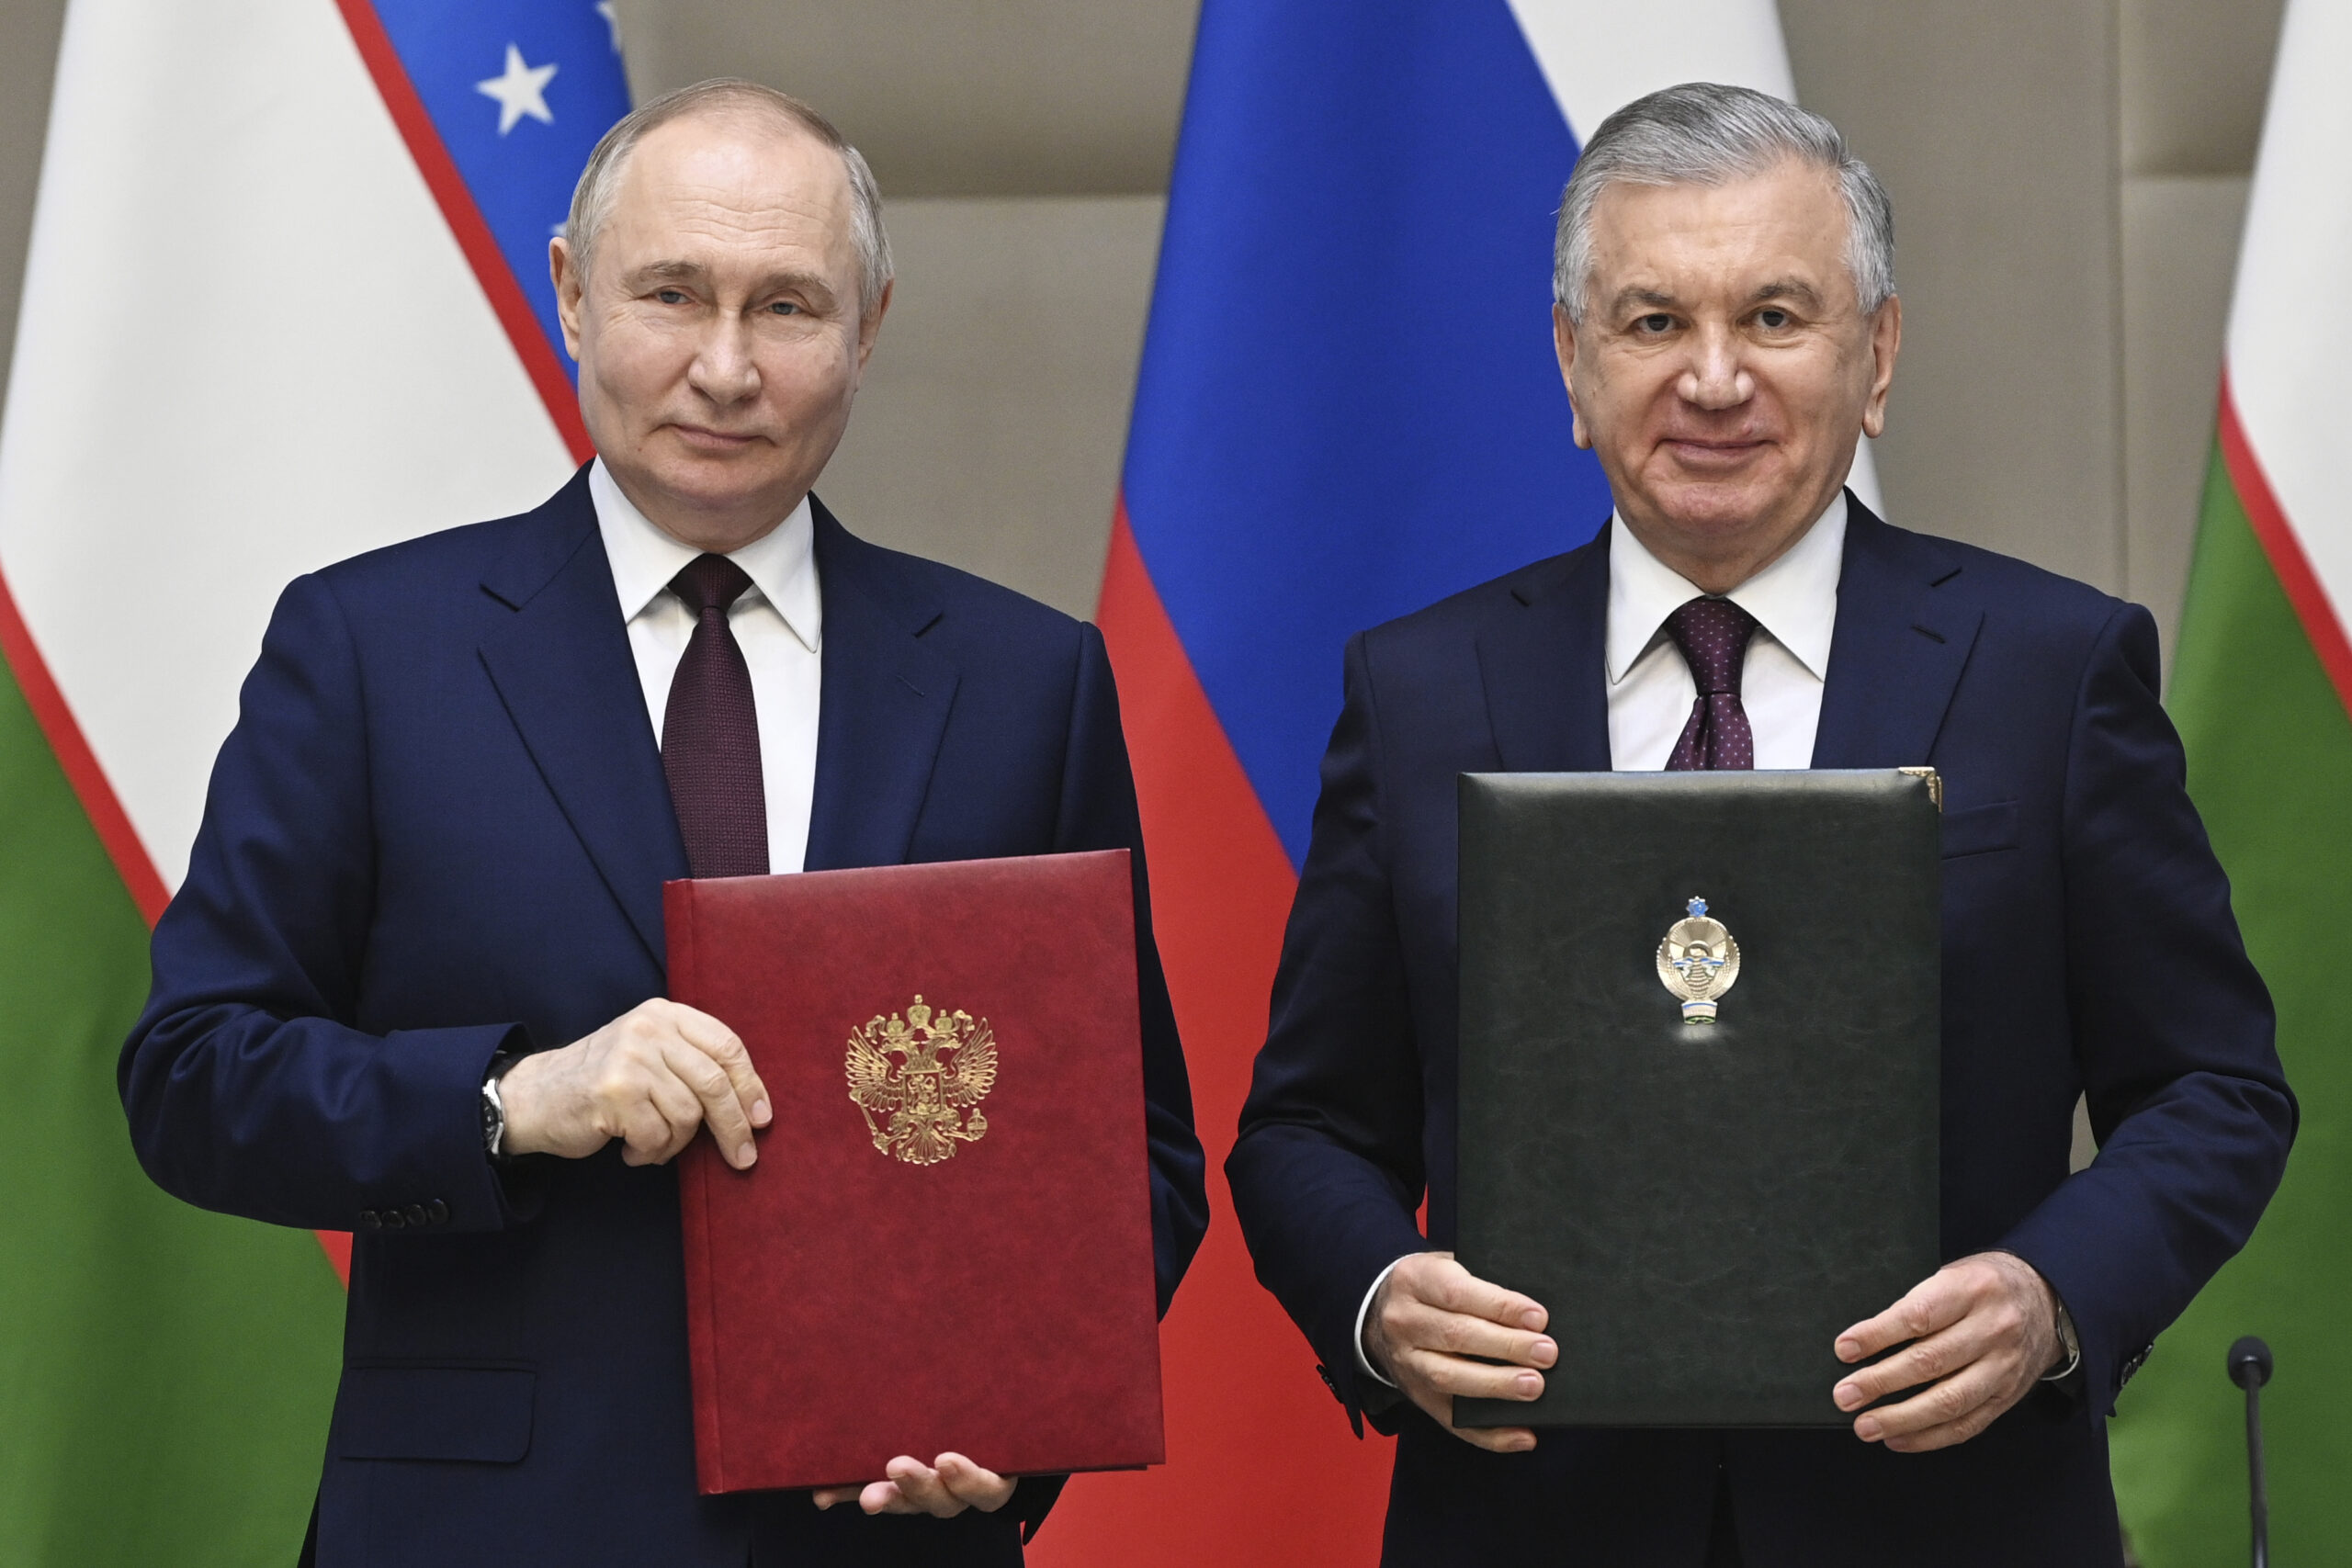 Russia will build Central Asia's first nuclear power plant in an agreement with Uzbekistan